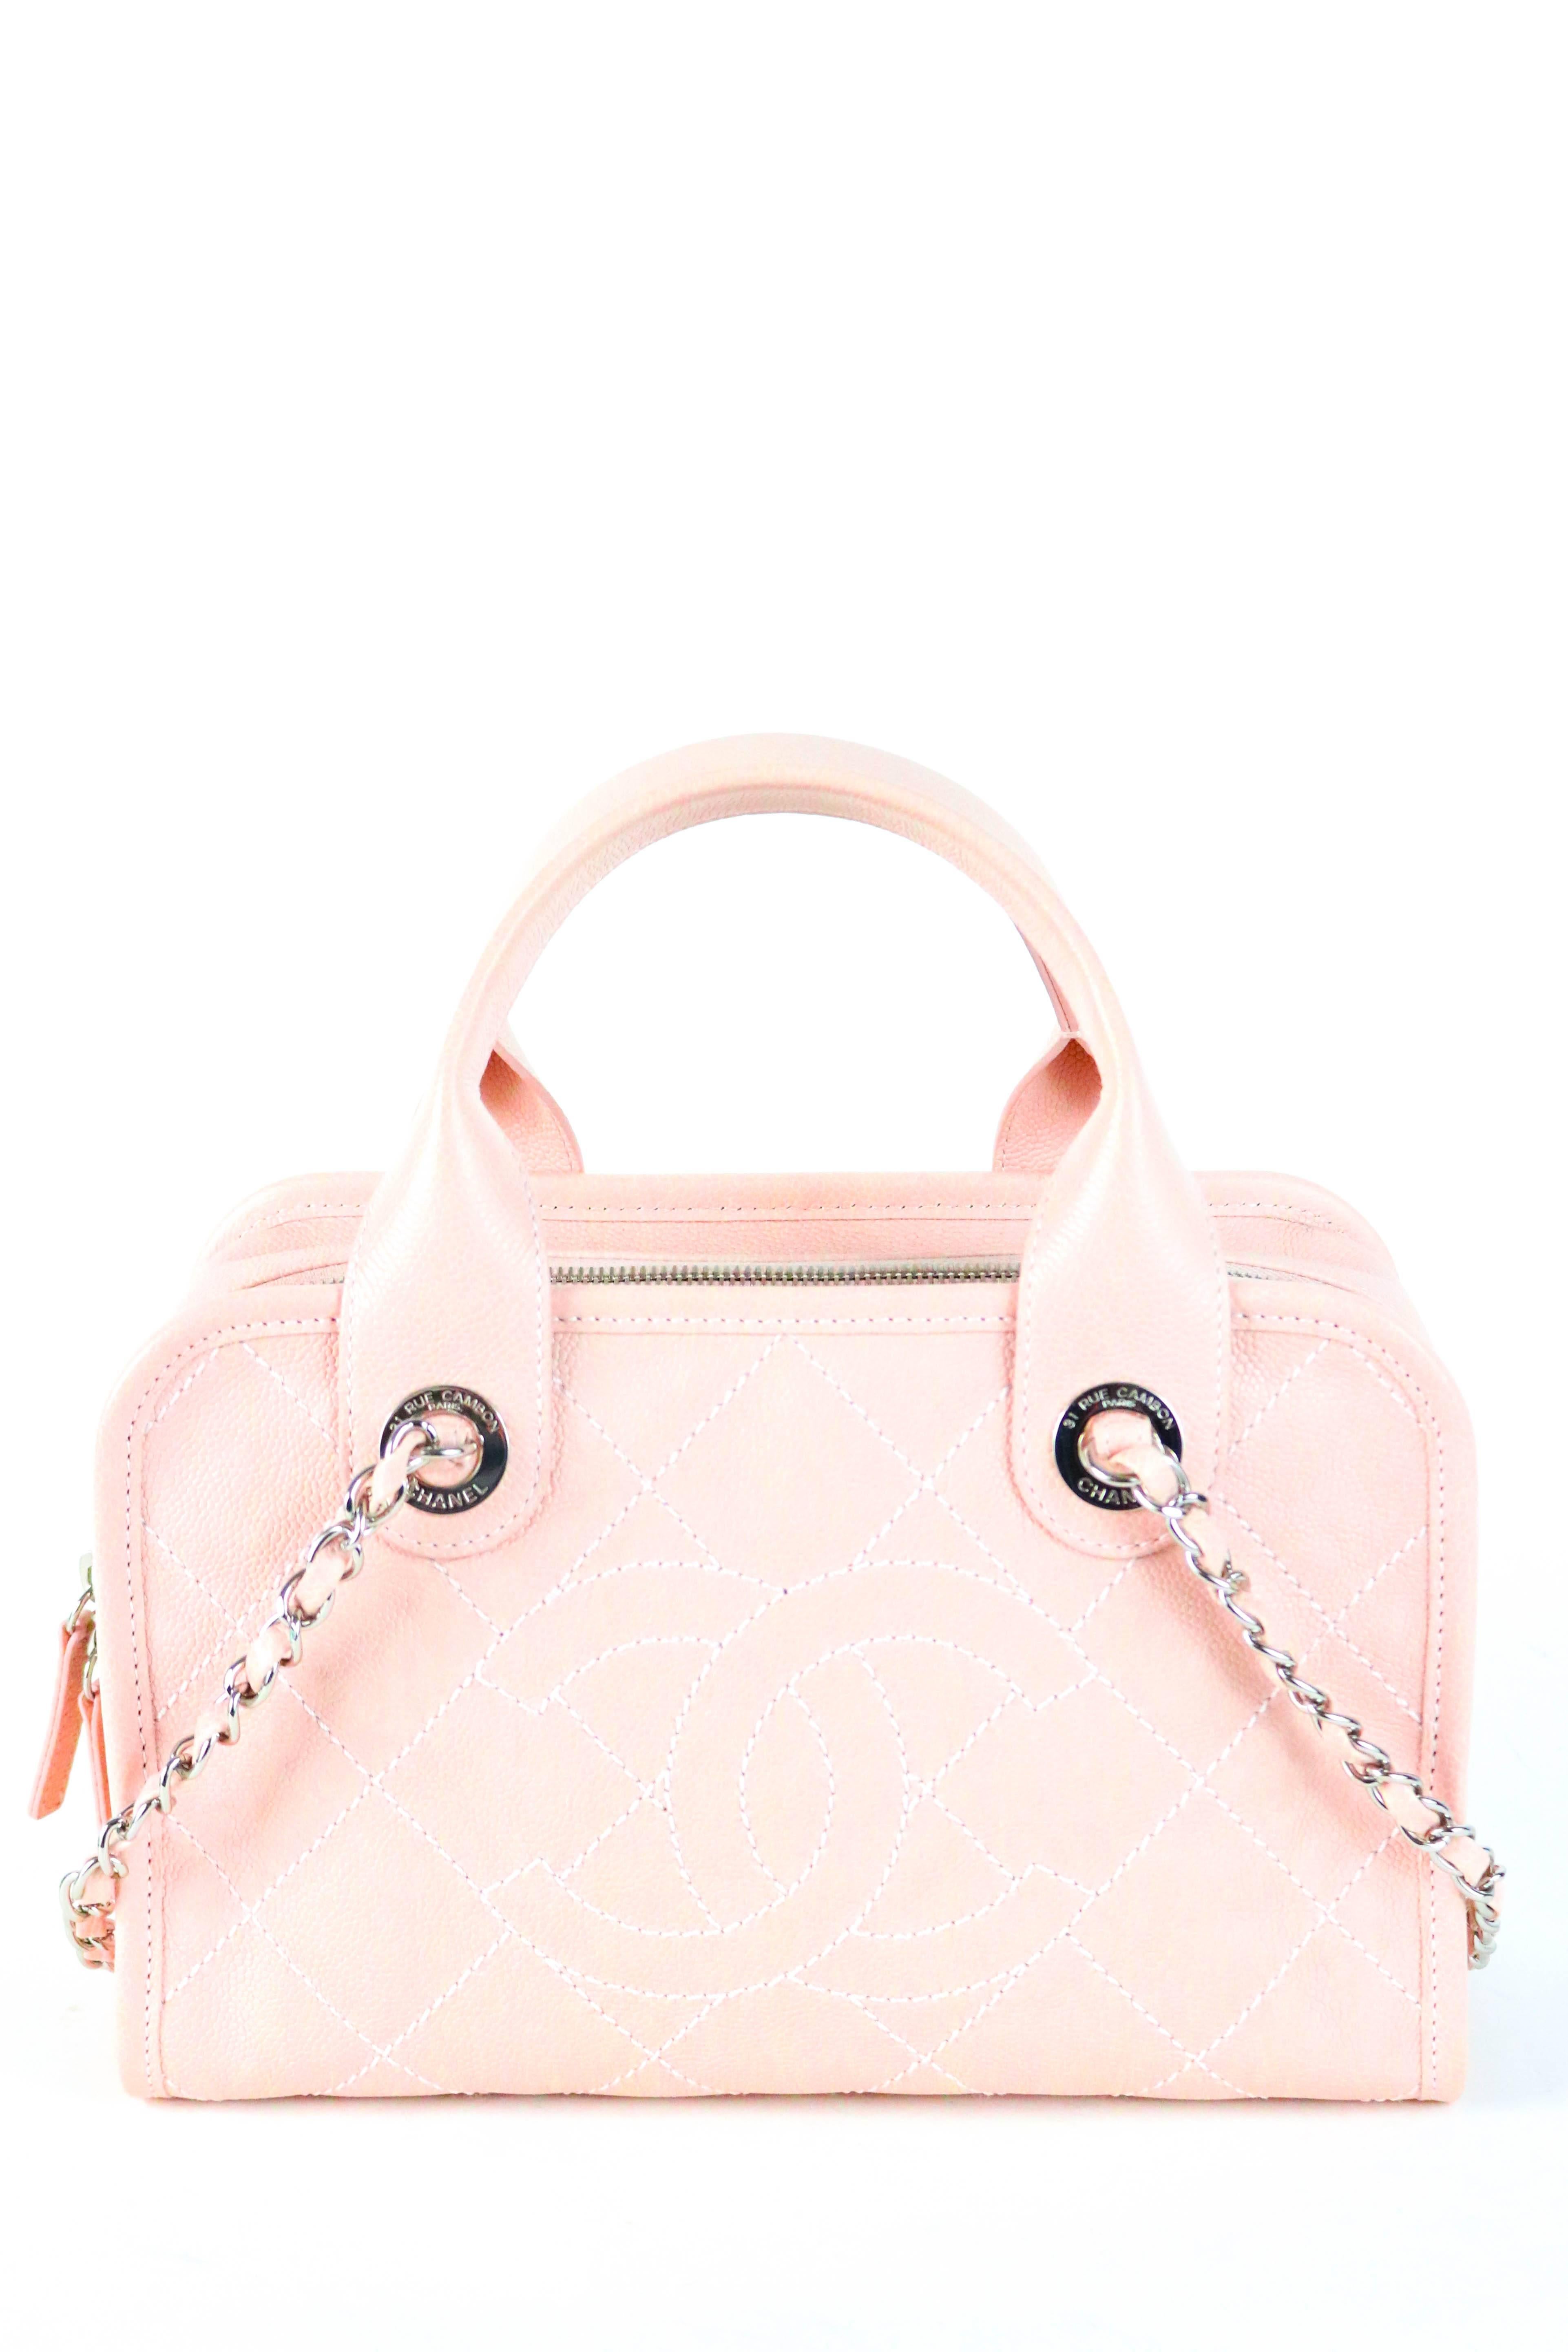 Women's CHANEL Quilted Caviar Bowling Bag 